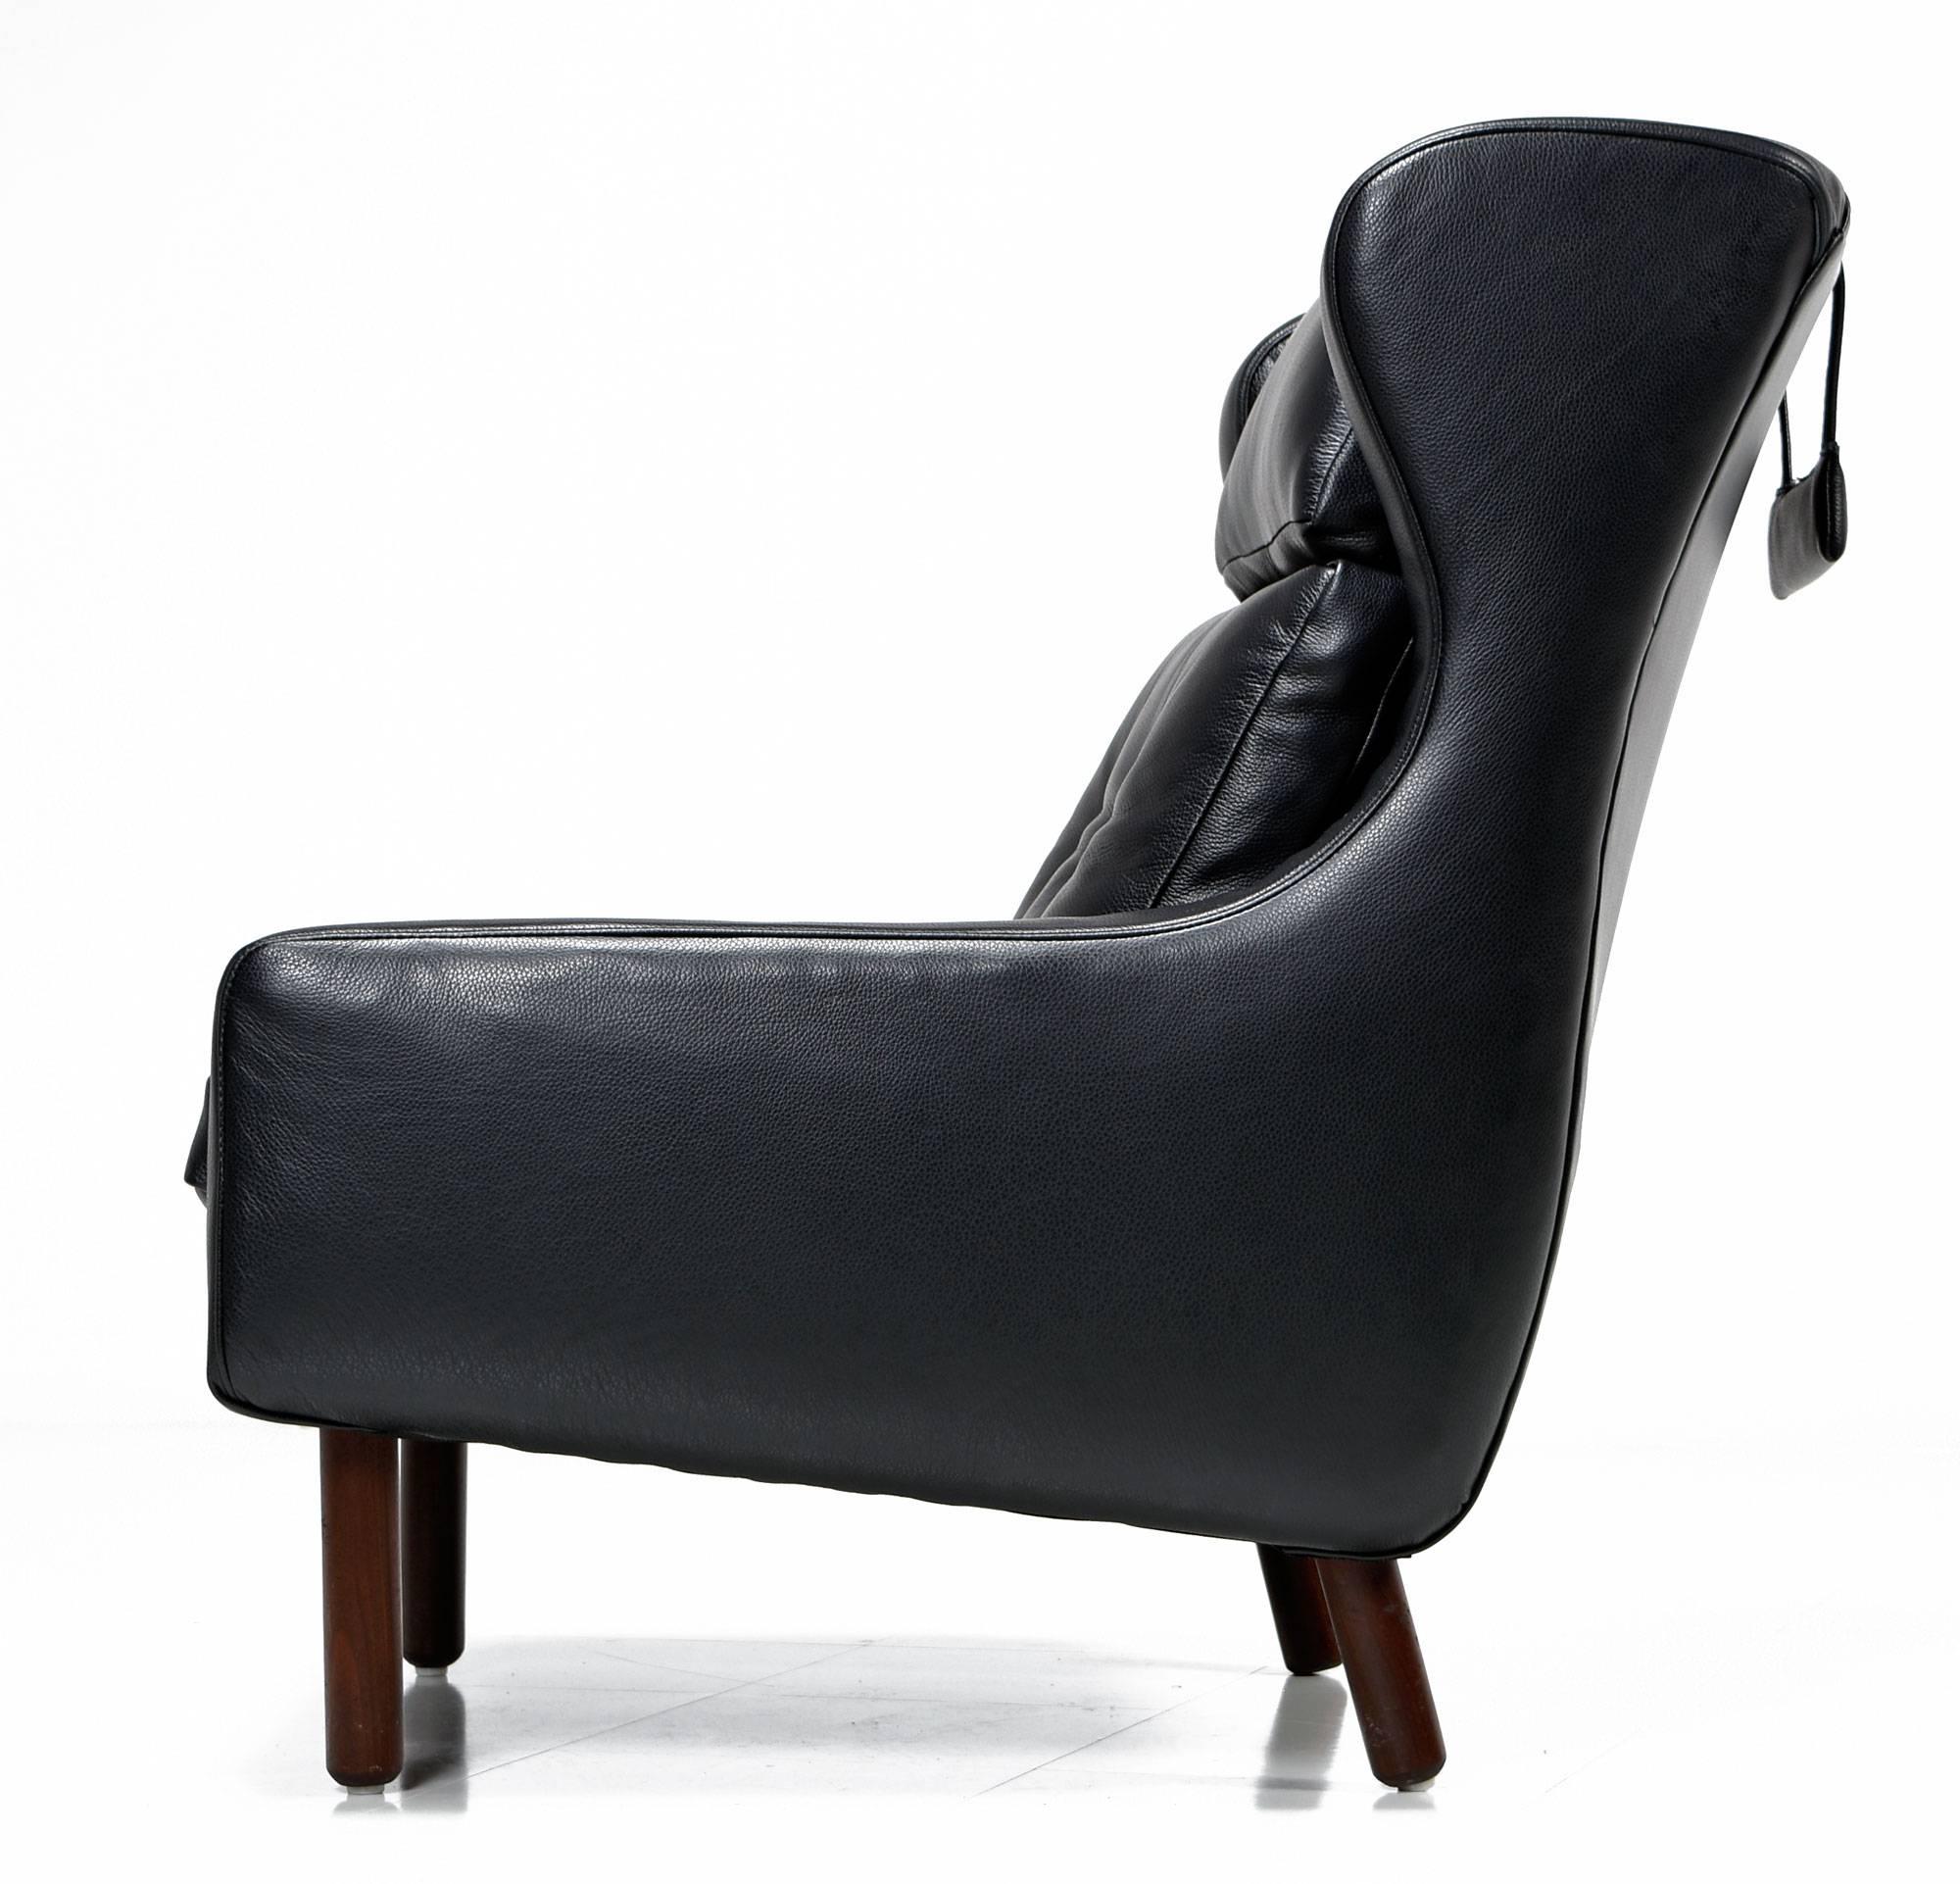 Fully restored with new luxurious black leather. This Mid-Century Modern lounge chair had no marking, but it's clearly in the style of Frits Henningsen and Svend Skipper, made in the 1960s. This wingback armchair features a weighted neck pillow in